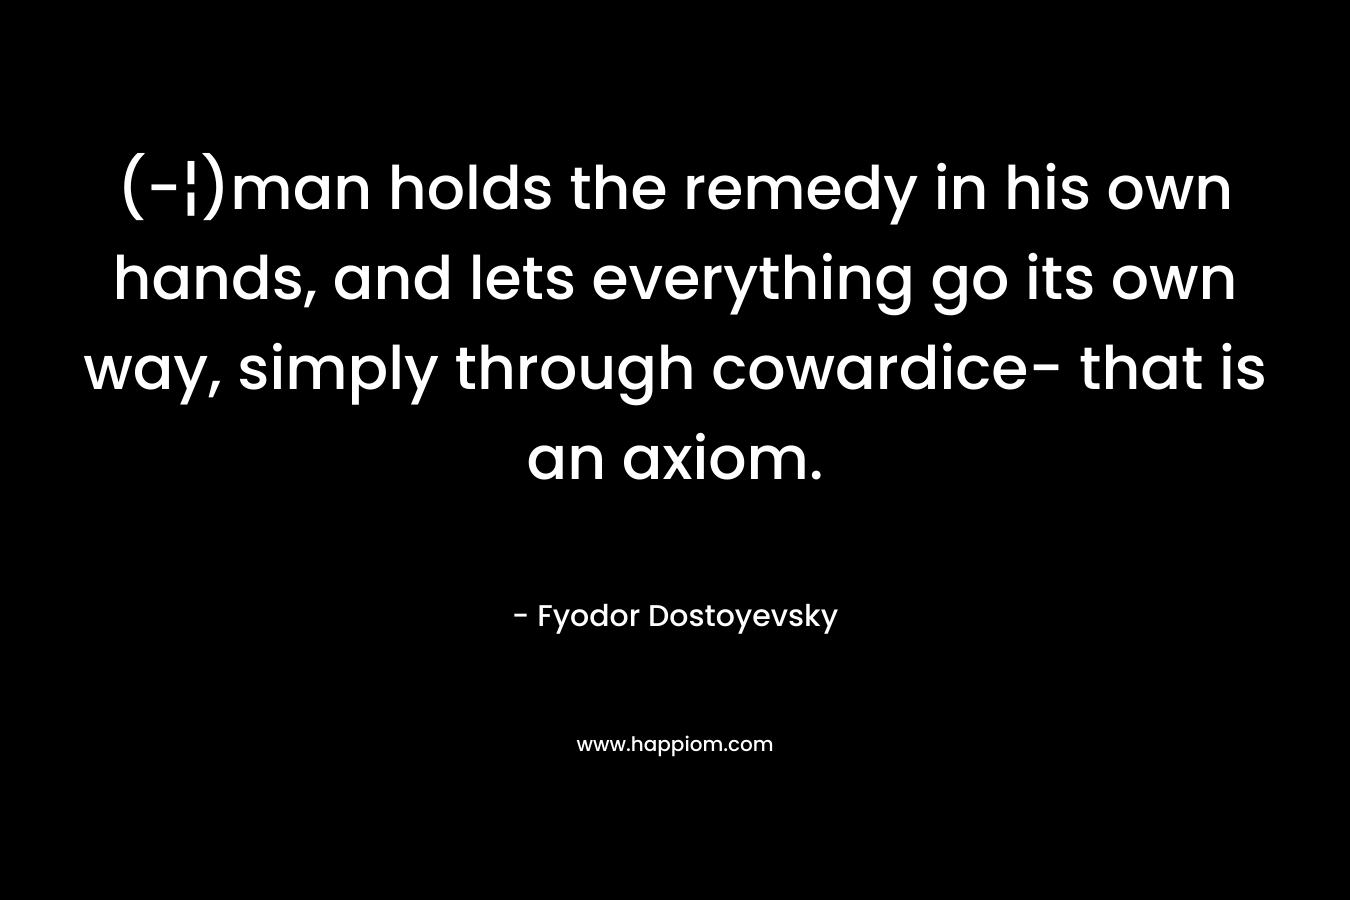 (-¦)man holds the remedy in his own hands, and lets everything go its own way, simply through cowardice- that is an axiom. – Fyodor Dostoyevsky